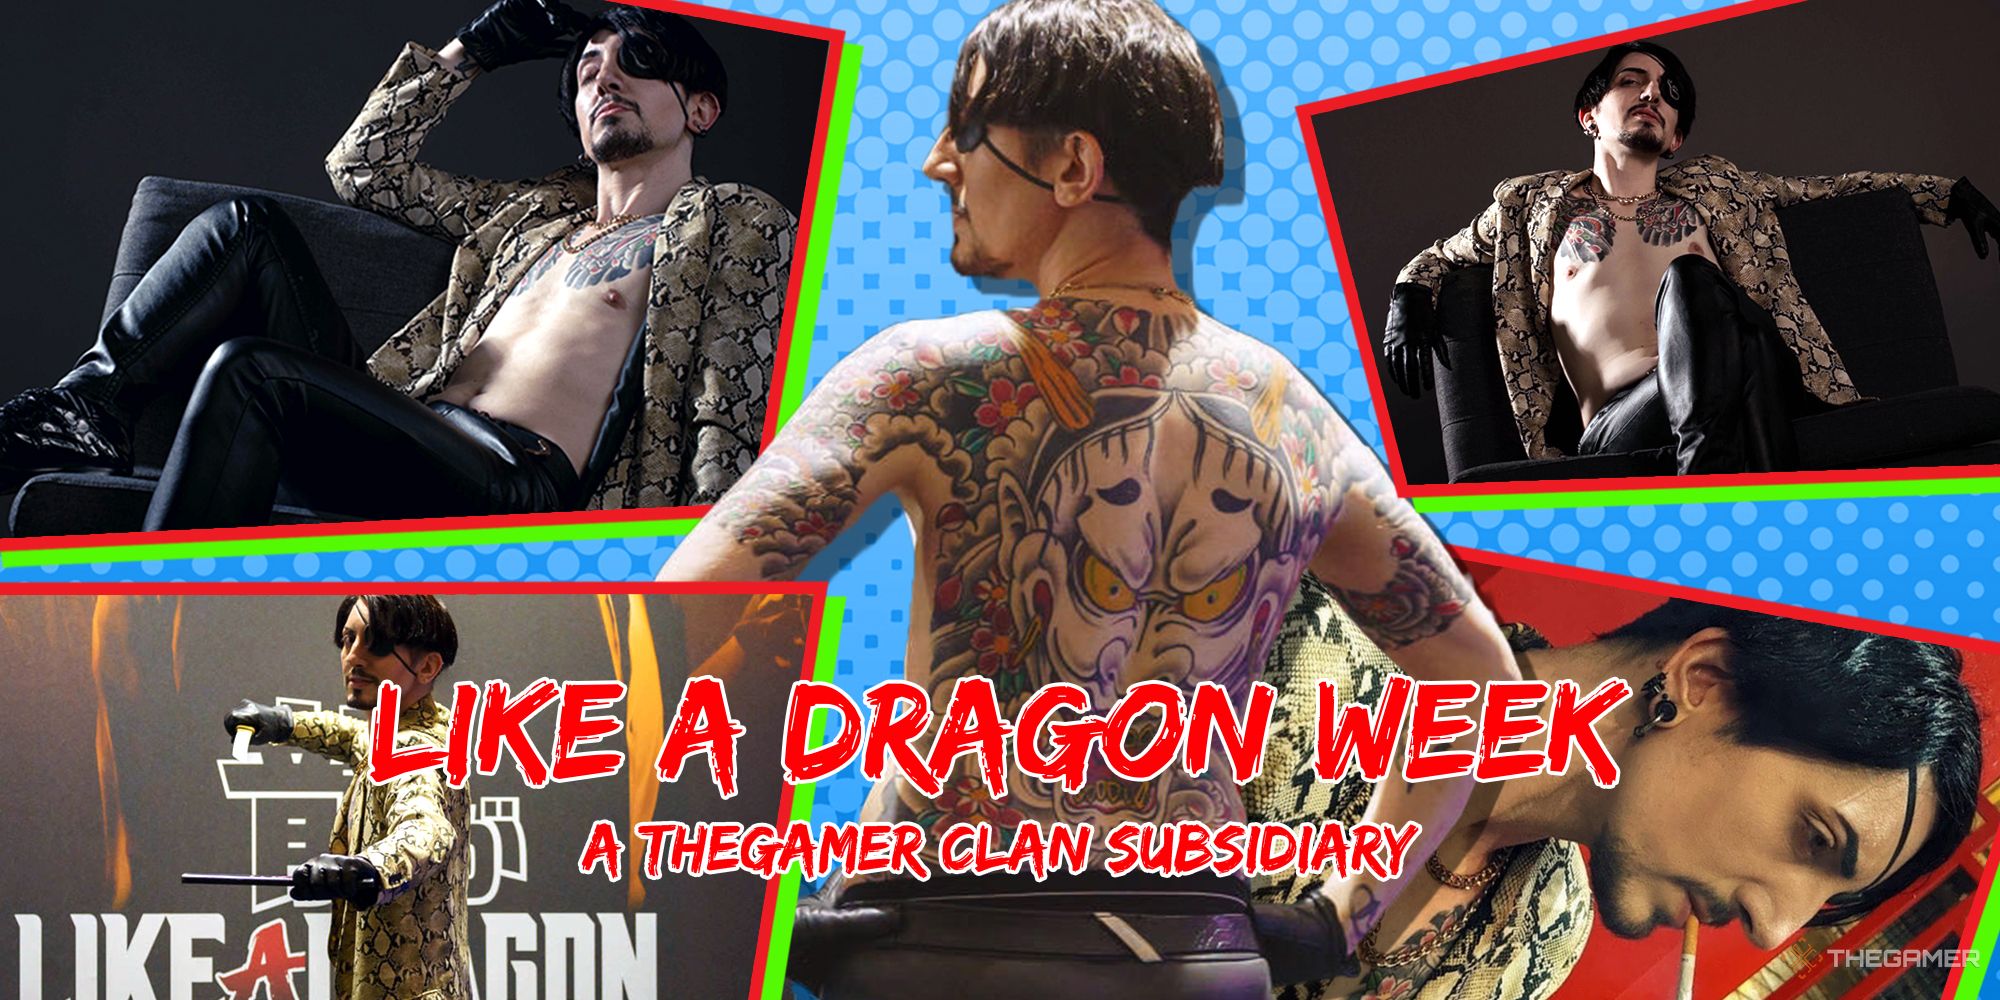 A collage of Damien Ferne, Majima cosplayer, with the Like a Dragon week text overlaid on top.